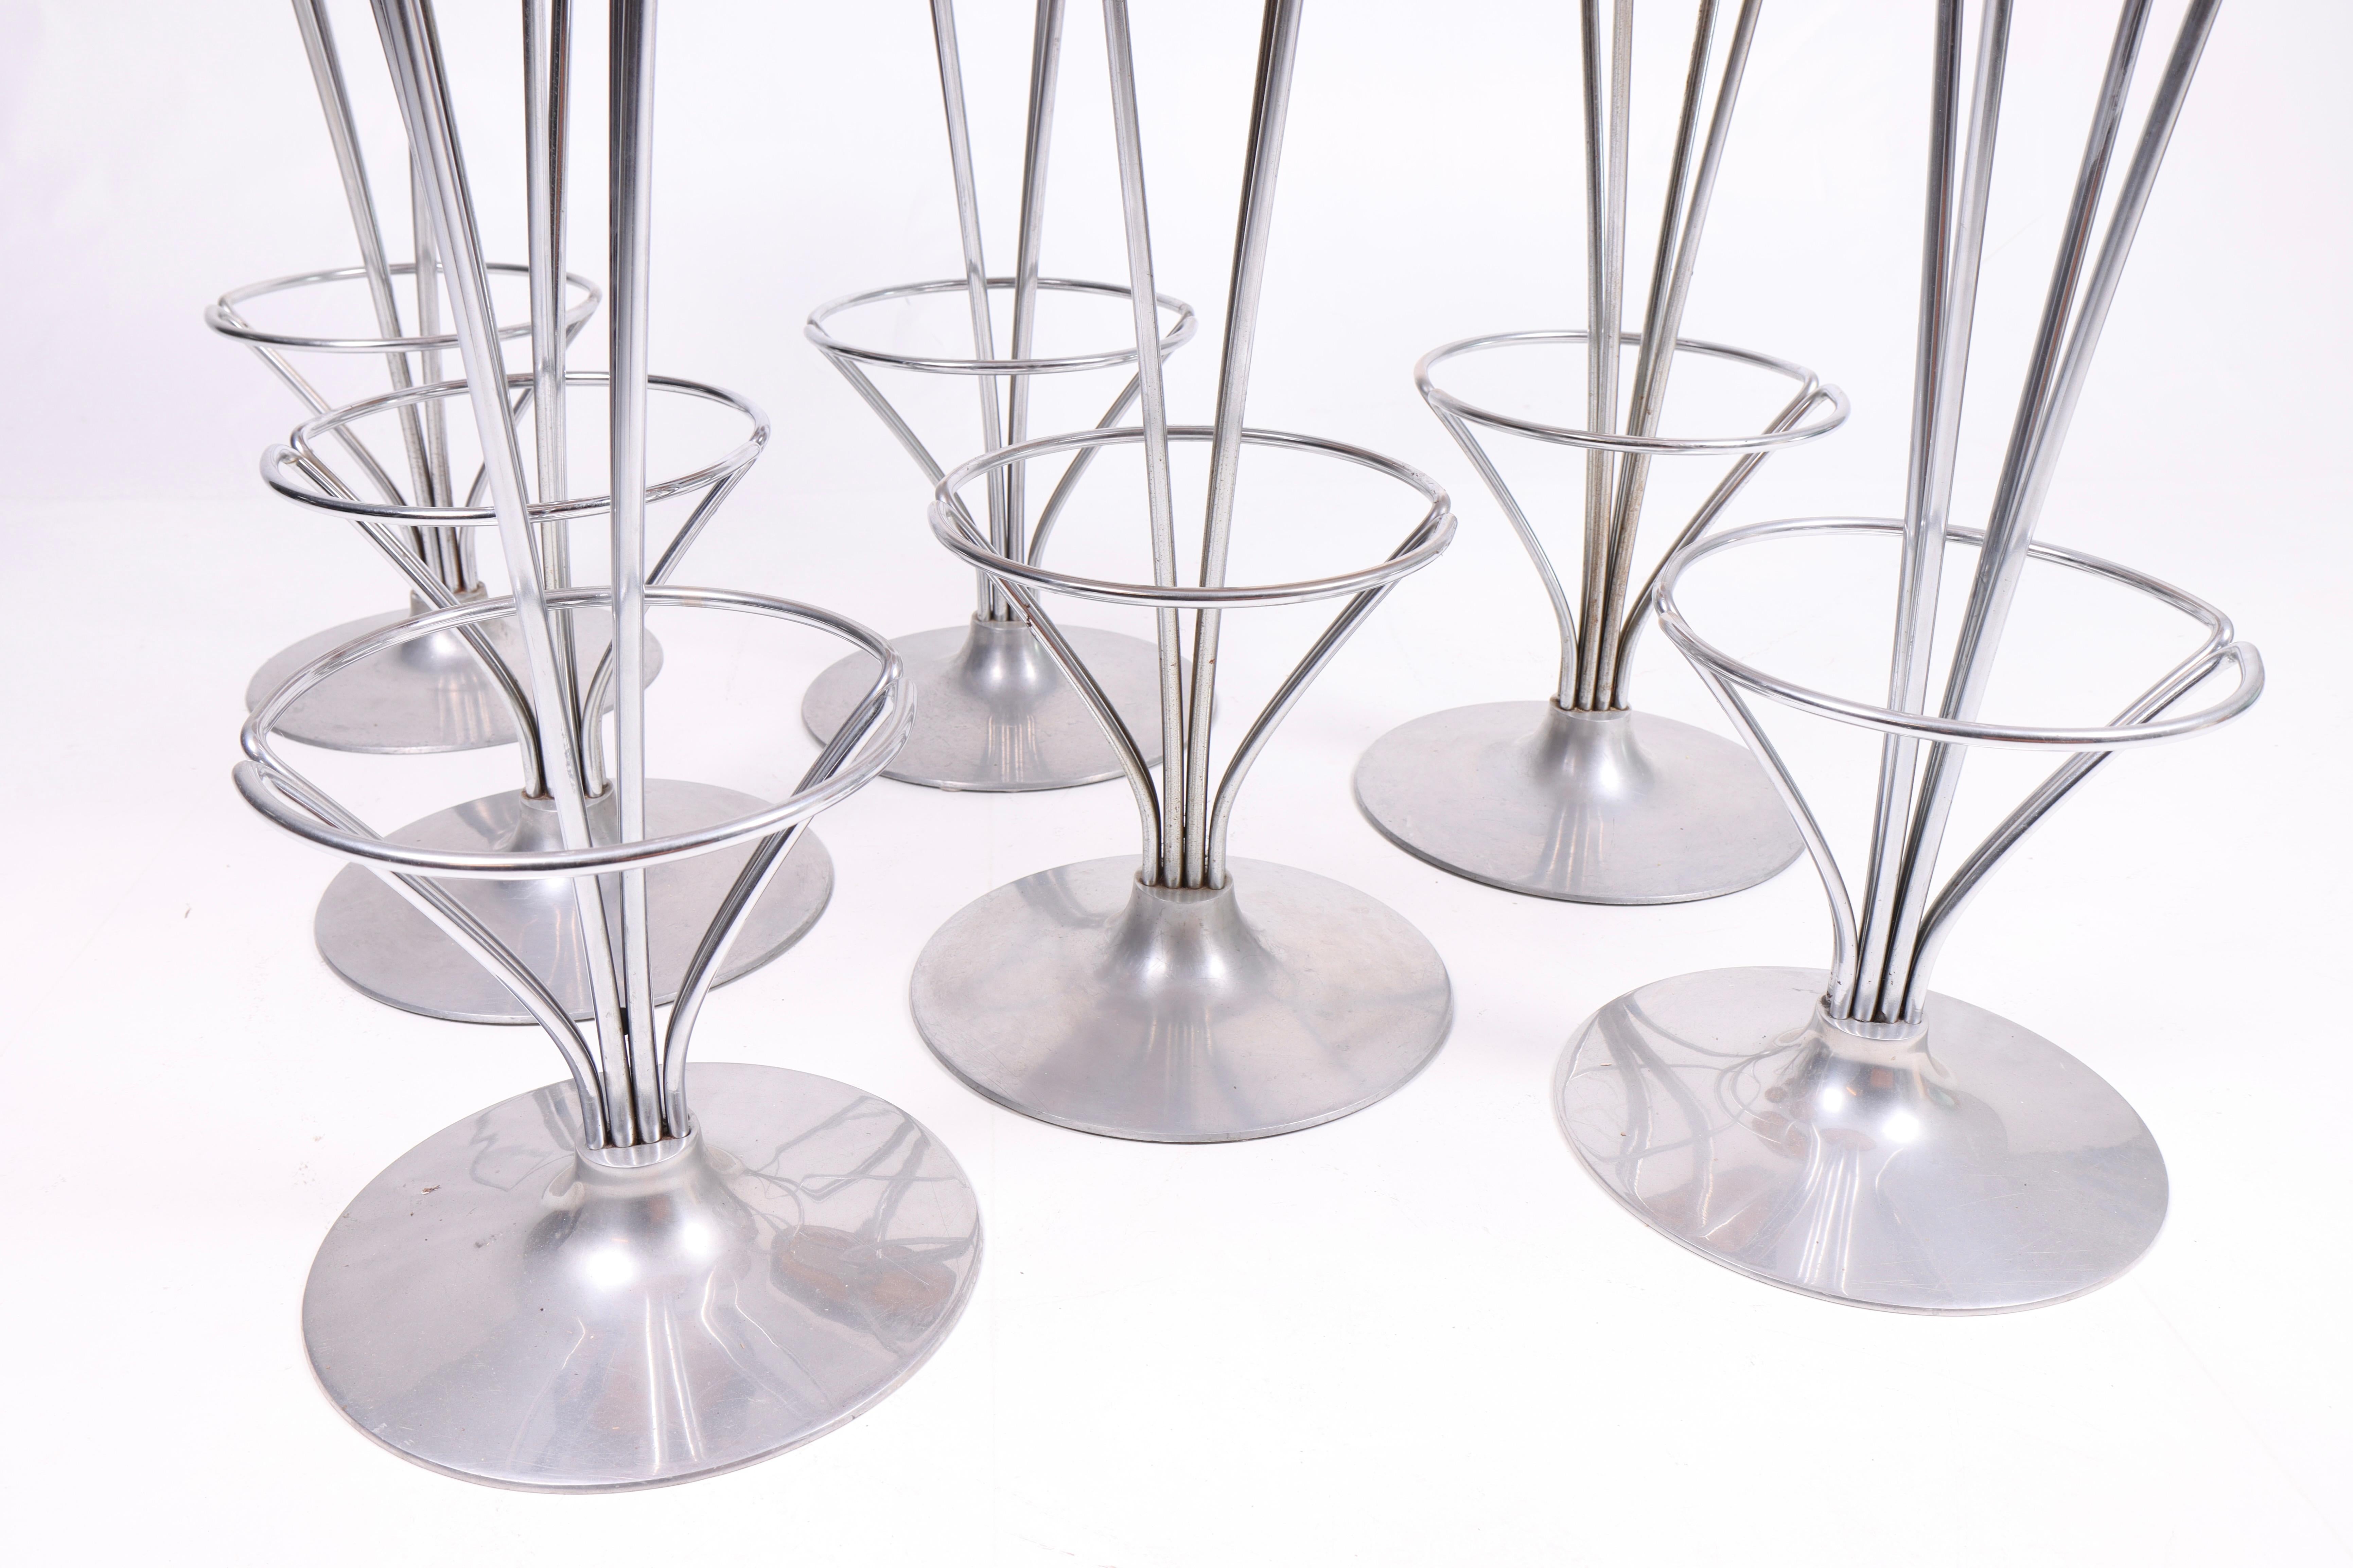 Metal Set of Seven Barstools in Patinated Leather by Piet Hein, Danish, 1960s For Sale